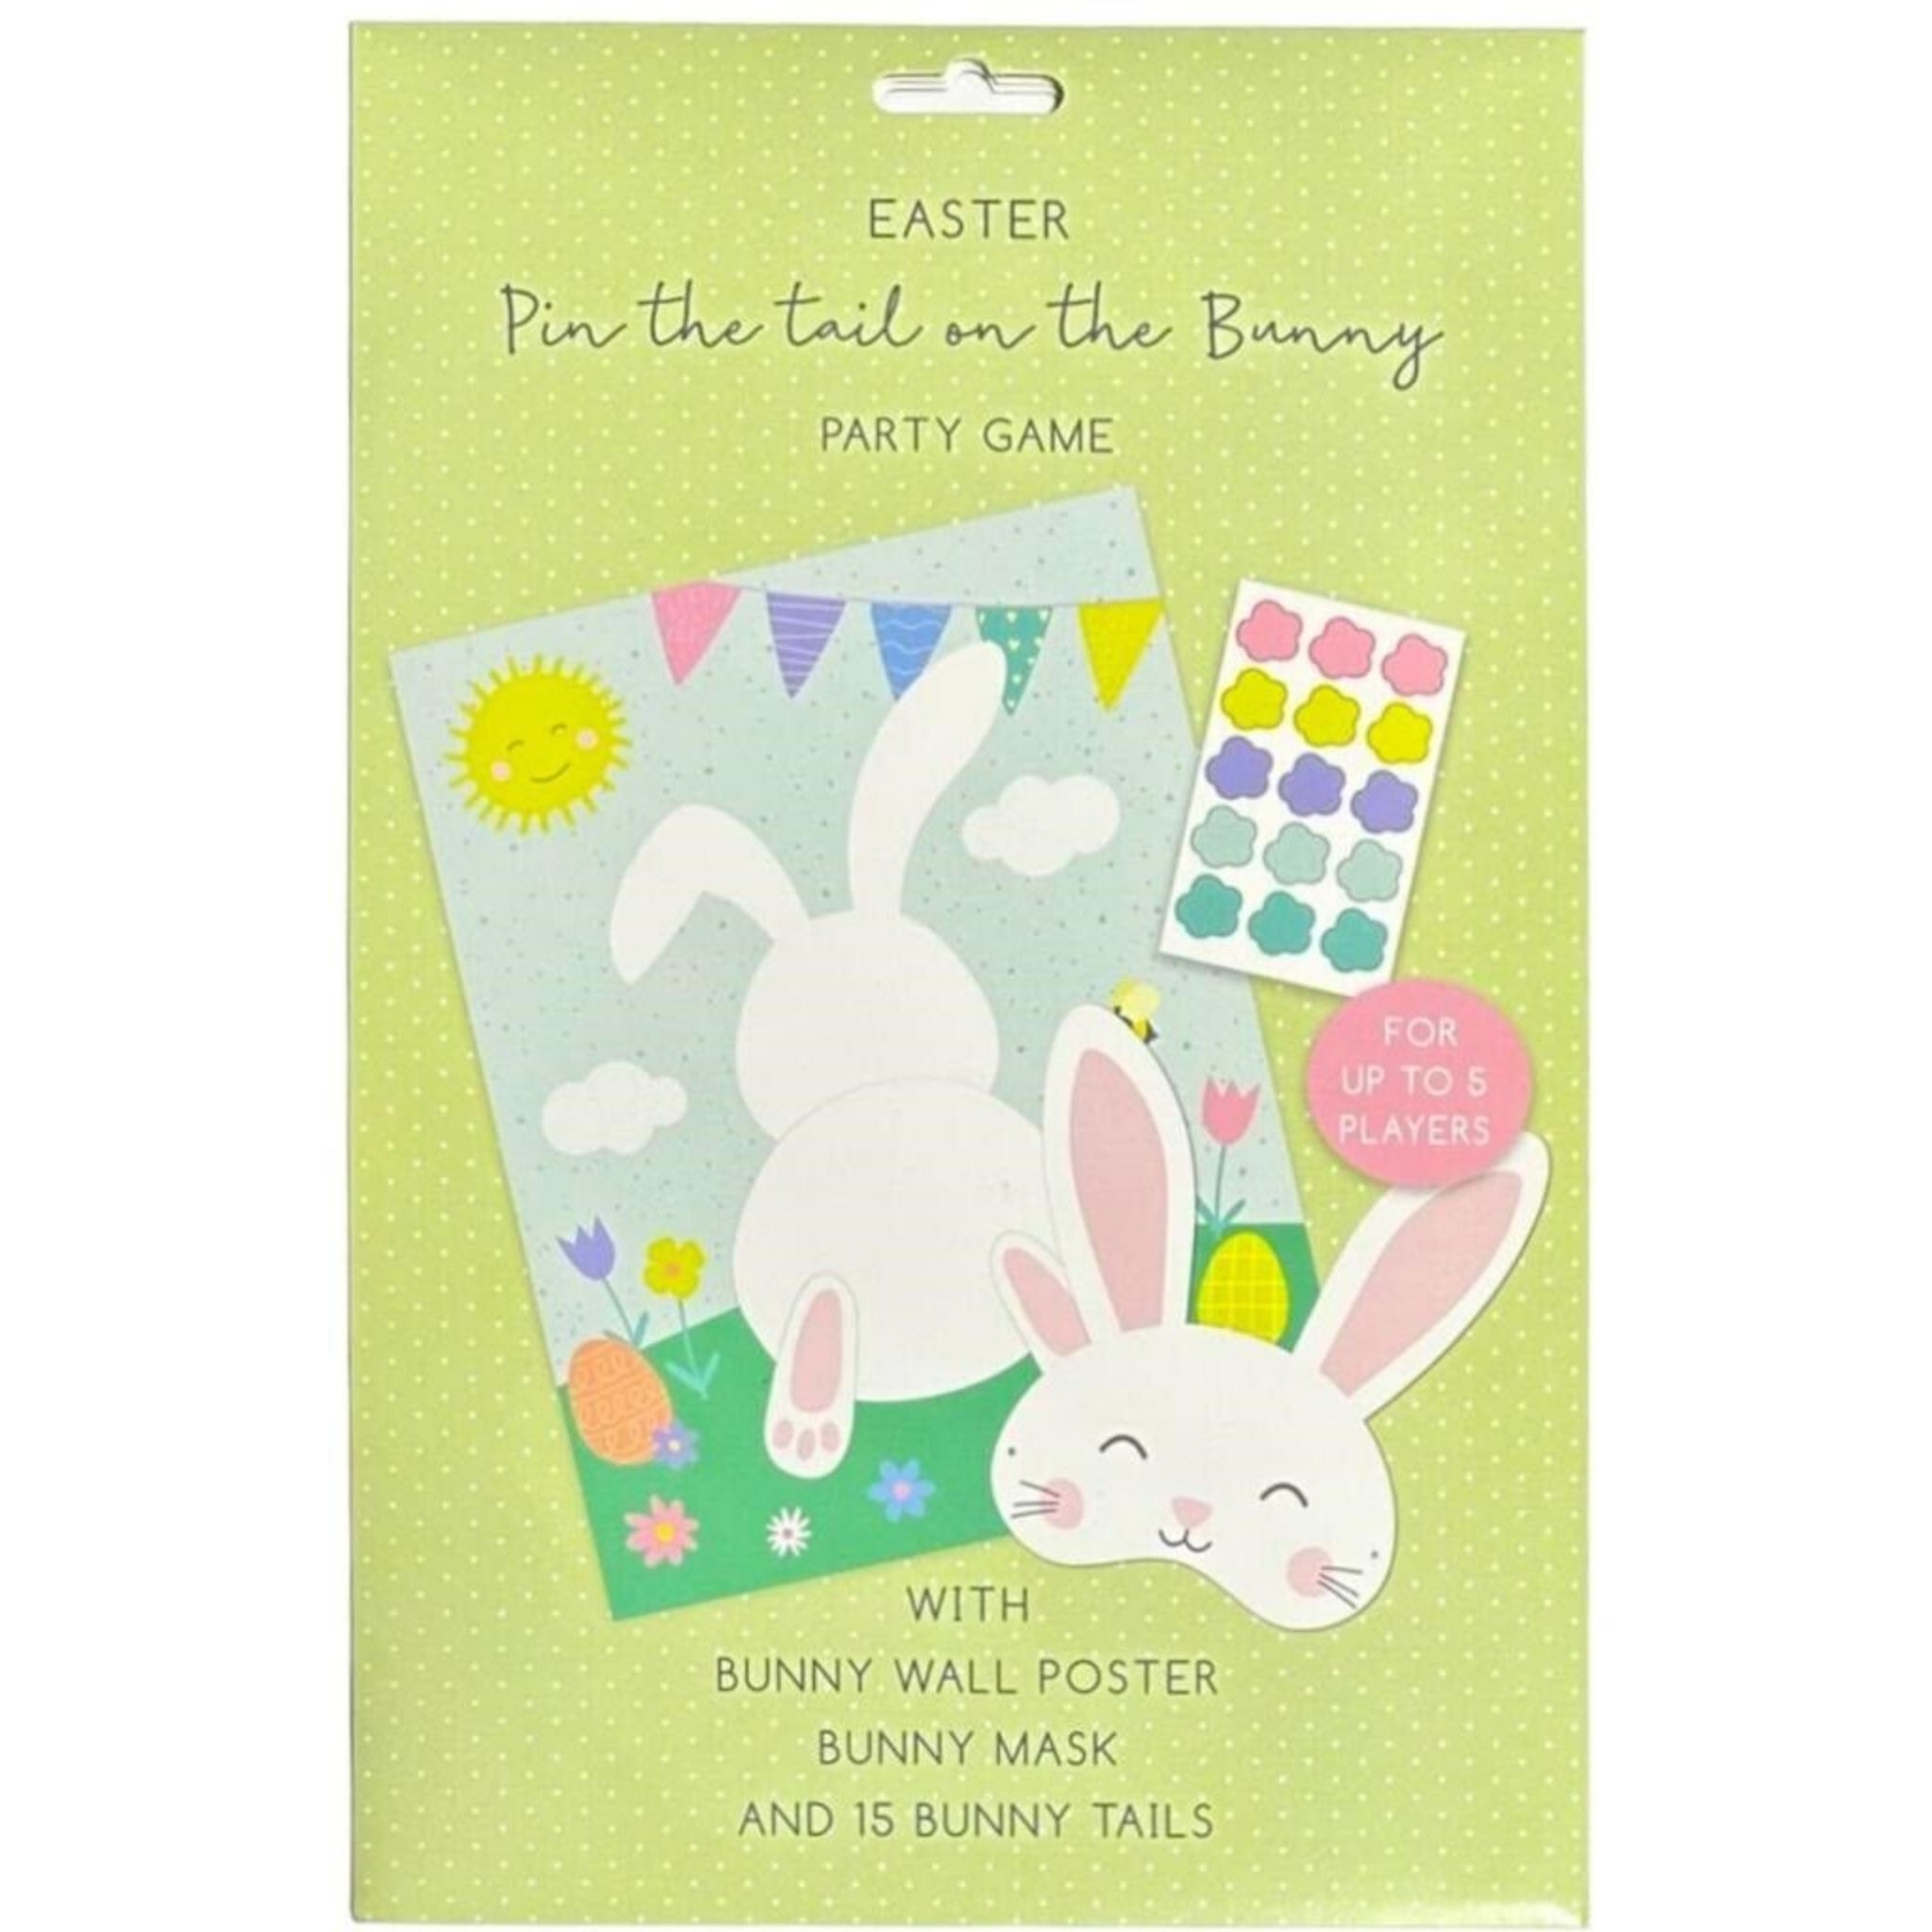 Beclen Harp Pin The Tail On The Bunny Rabbit Easter Egg Hunt Kids Fun Easter Party Game Gift